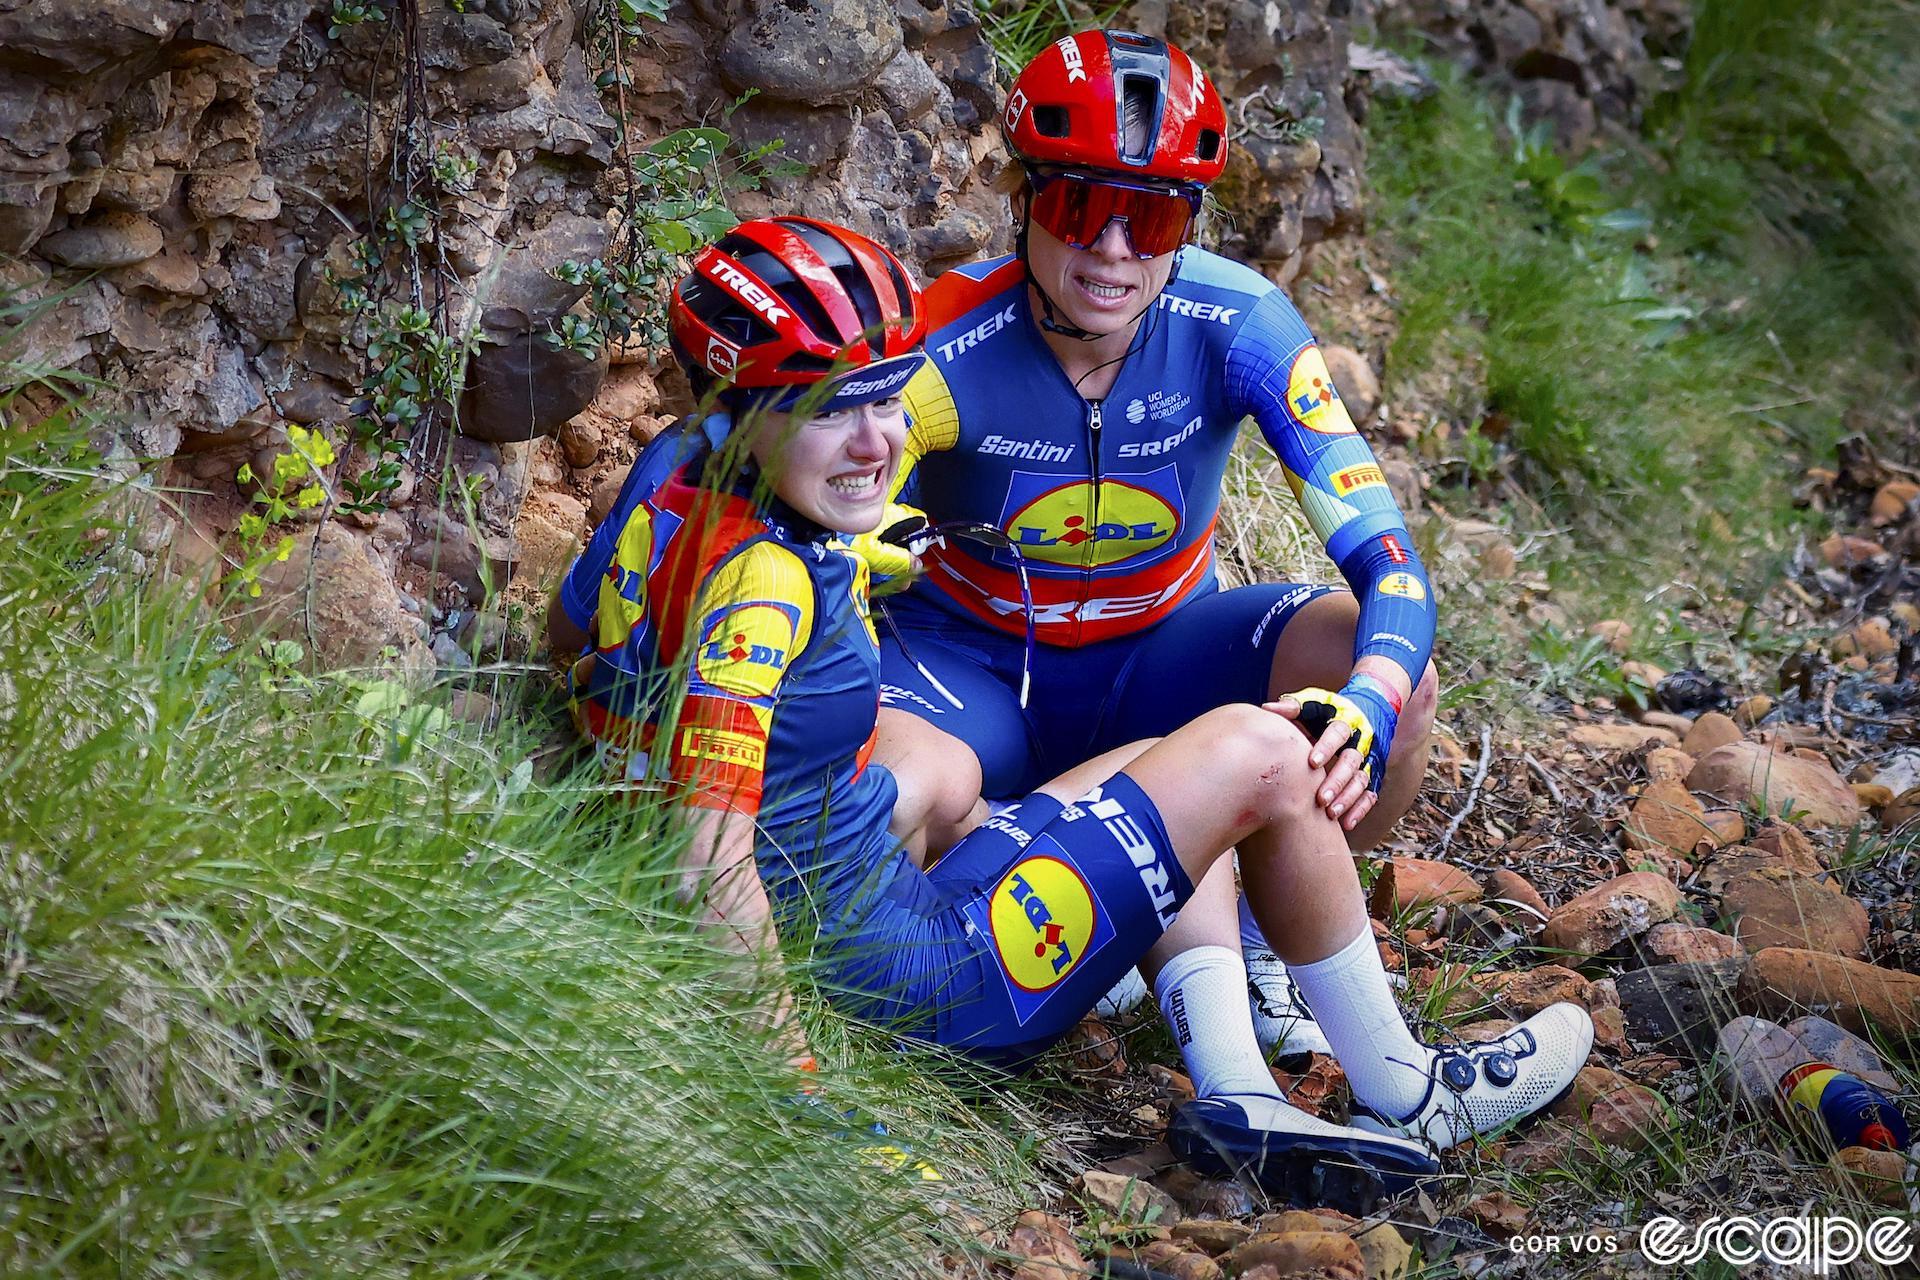 Gaia Realini winces in pain as she sits on the side of the road after crashing on stage 5 of La Vuelta Femenina. Her Lidl-Trek teammate Brodie Chapman crouches next to her, taking a watchful approach to her banged-up teammate.